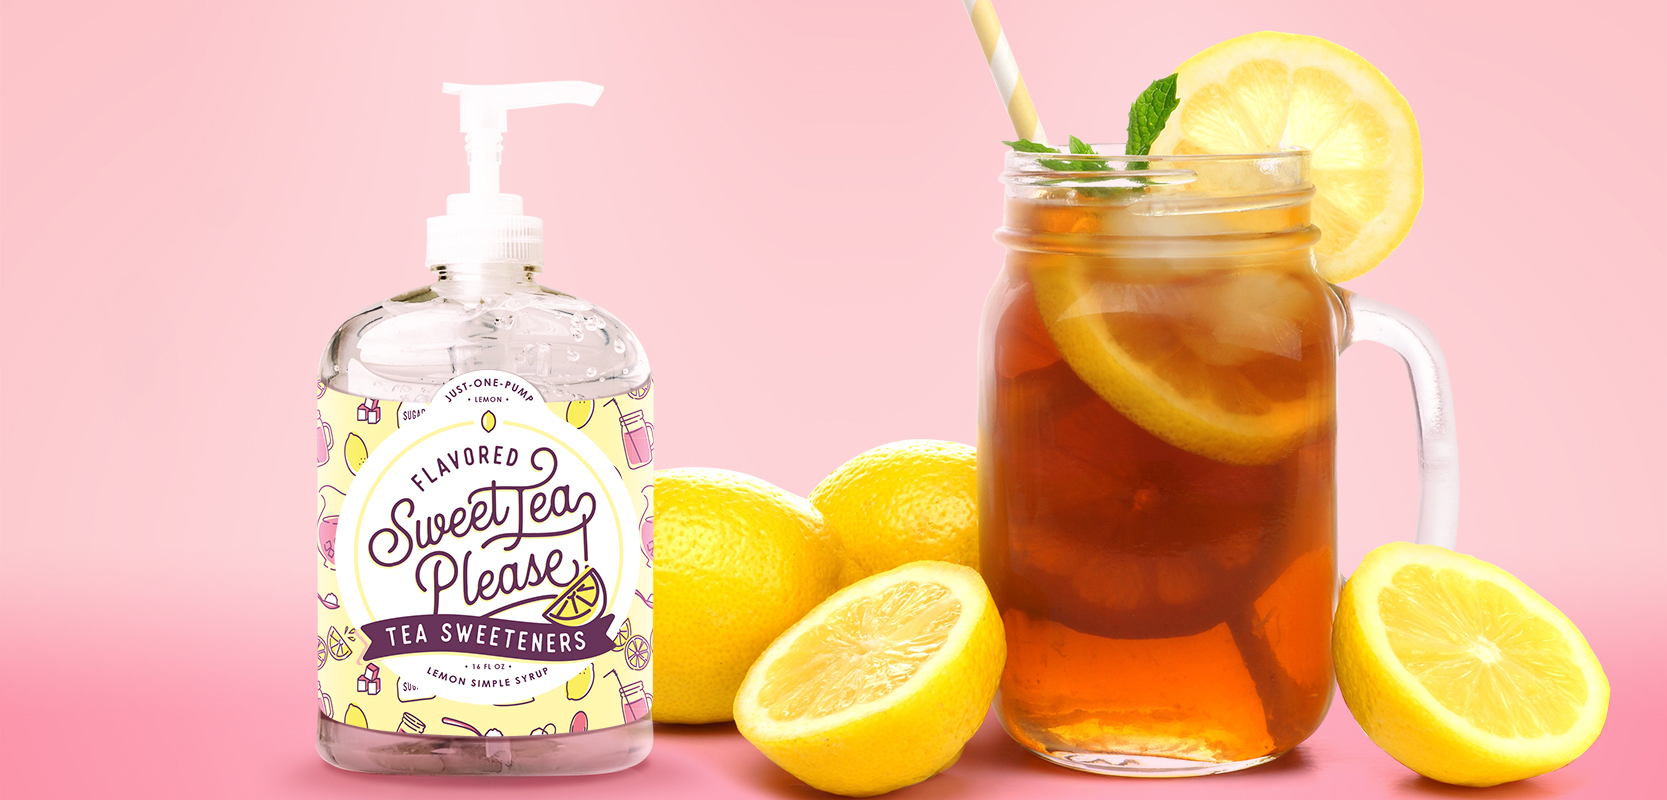 drink sweetener package design with mason jar and lemon slices